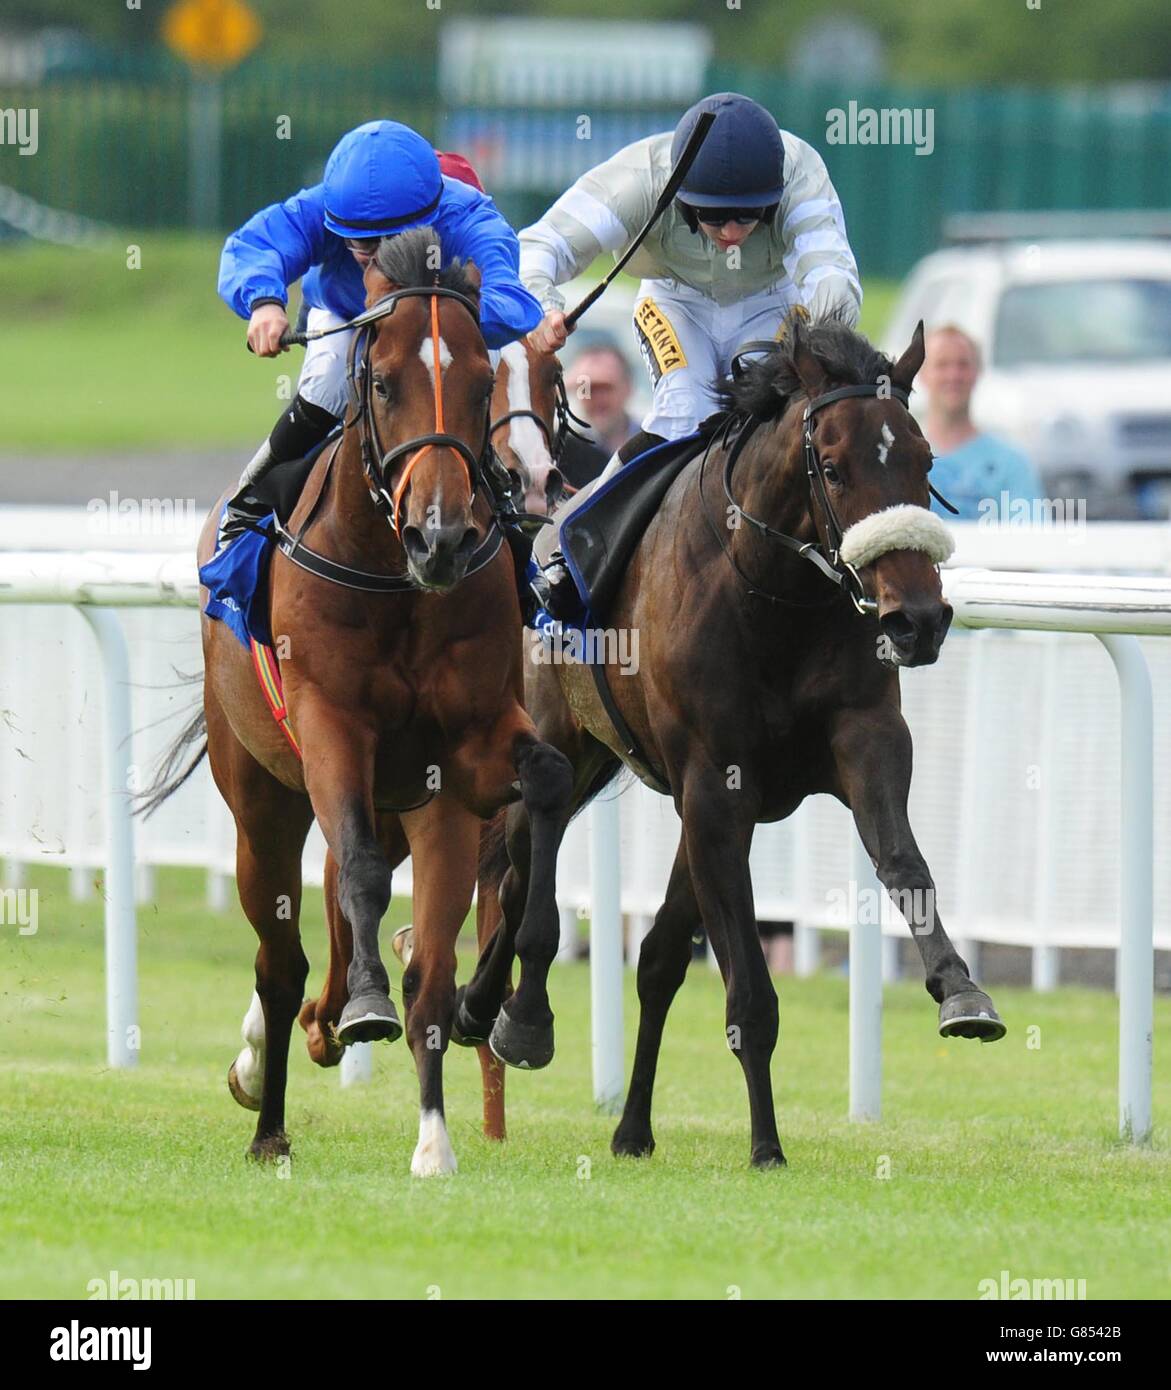 Final Frontier ridden by Shane Foley (left) before winning the Jebel Ali Racecourse & Stables Anglesey Stakes ahead of Miss Katie Mae ridden by Colin Keane (right) during day one of the Darley Irish Oaks Weekend at The Curragh Racecourse, Kildare. Stock Photo